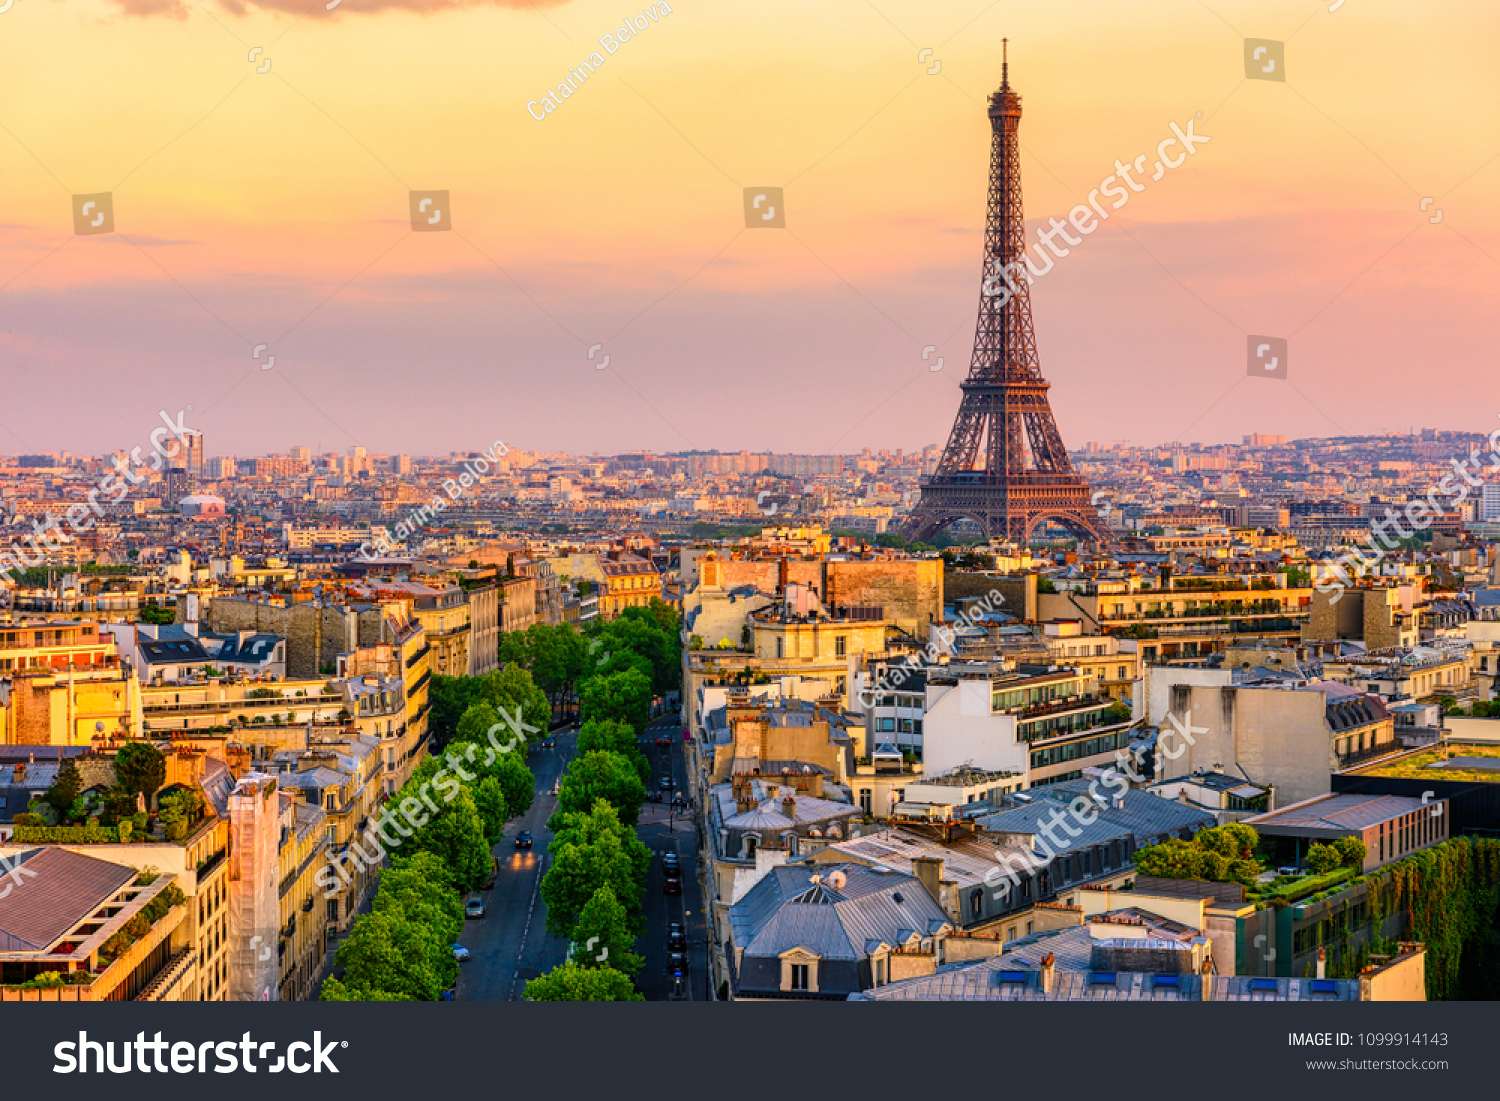 Skyline of Paris with Eiffel Tower in Paris, France. Panoramic sunset view of Paris #1099914143